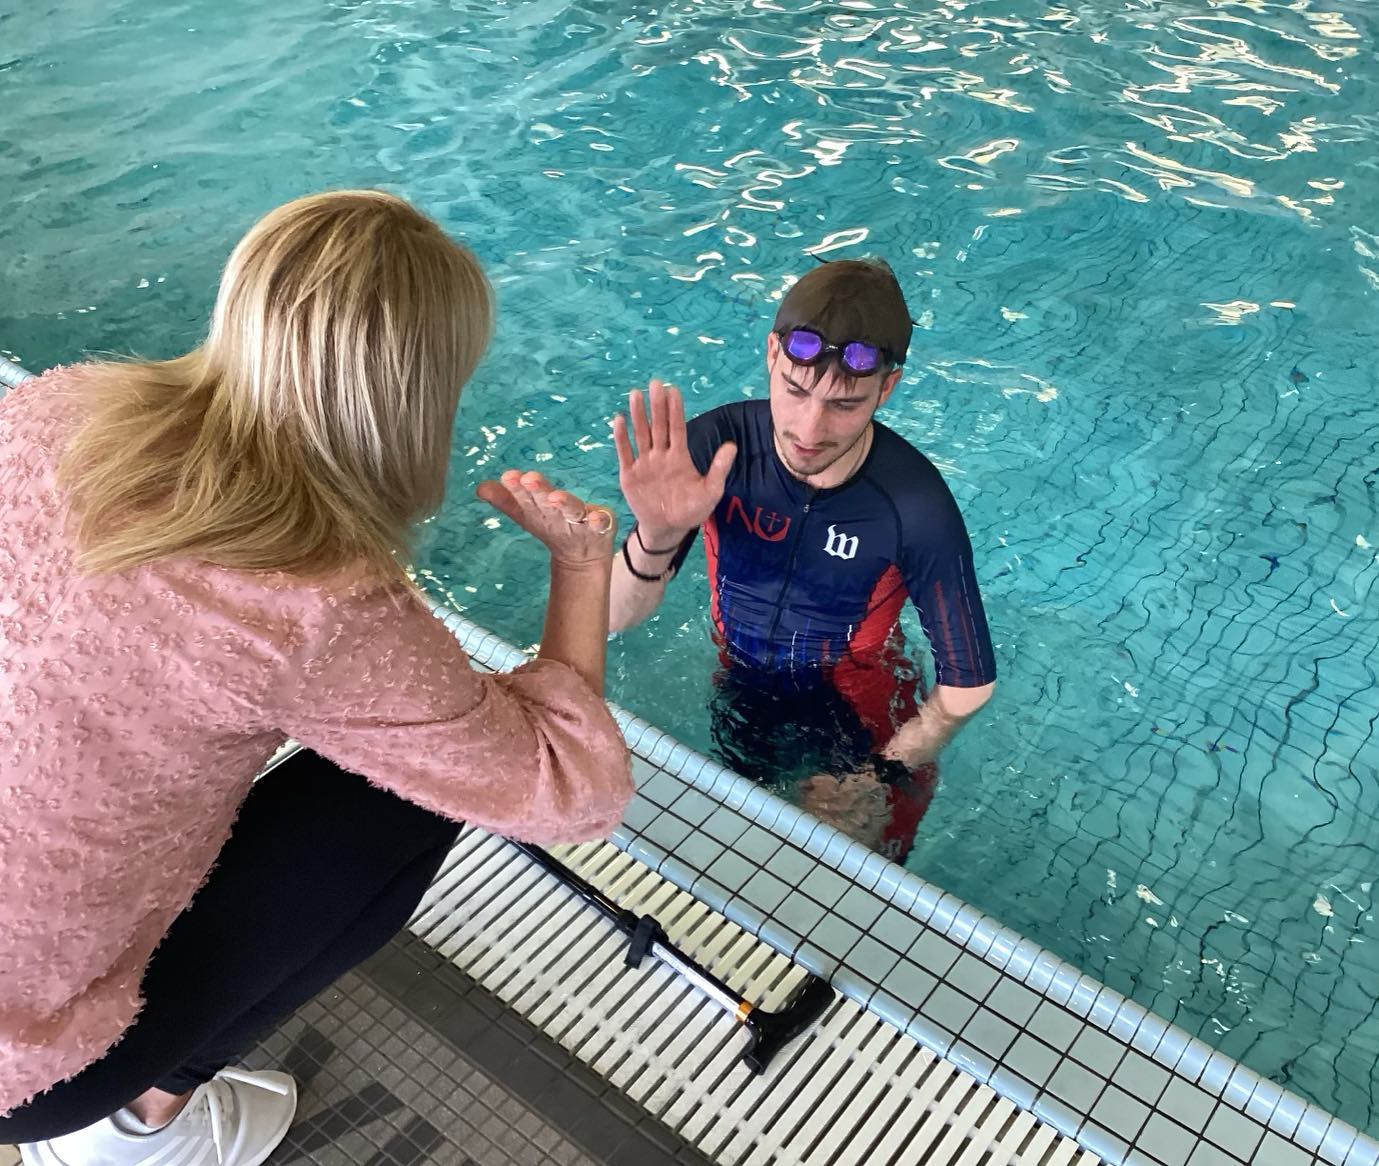 Wagner is high-fived after a successful 200-yard swim at the Newton YMCA, marking his graduation from therapy following his accident.